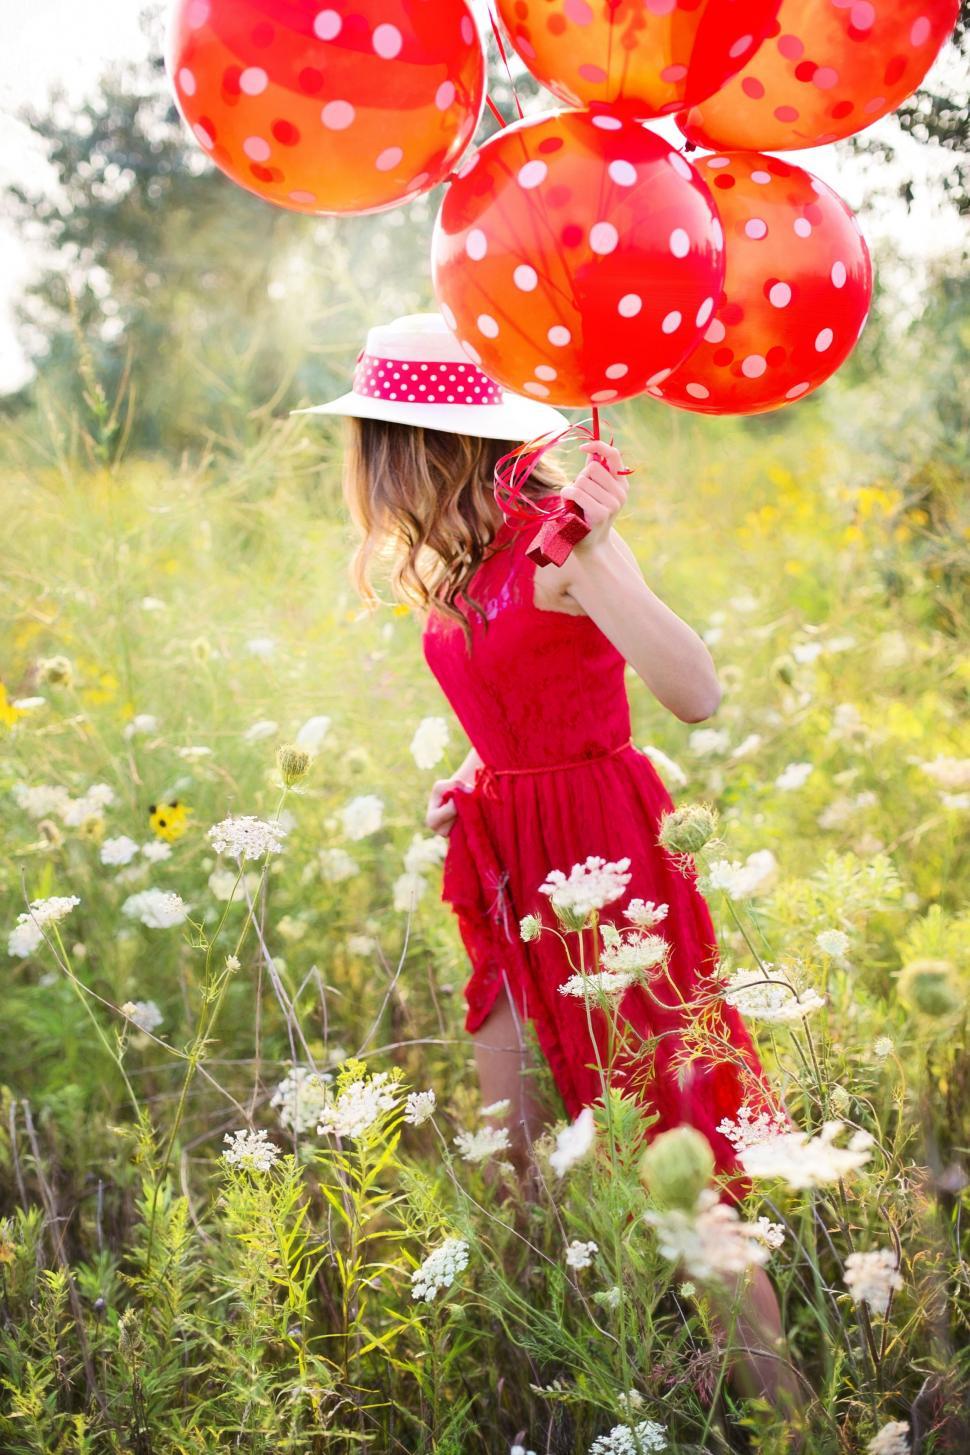 Free Image of Red Dress Woman With Balloons in White Daisy Field 